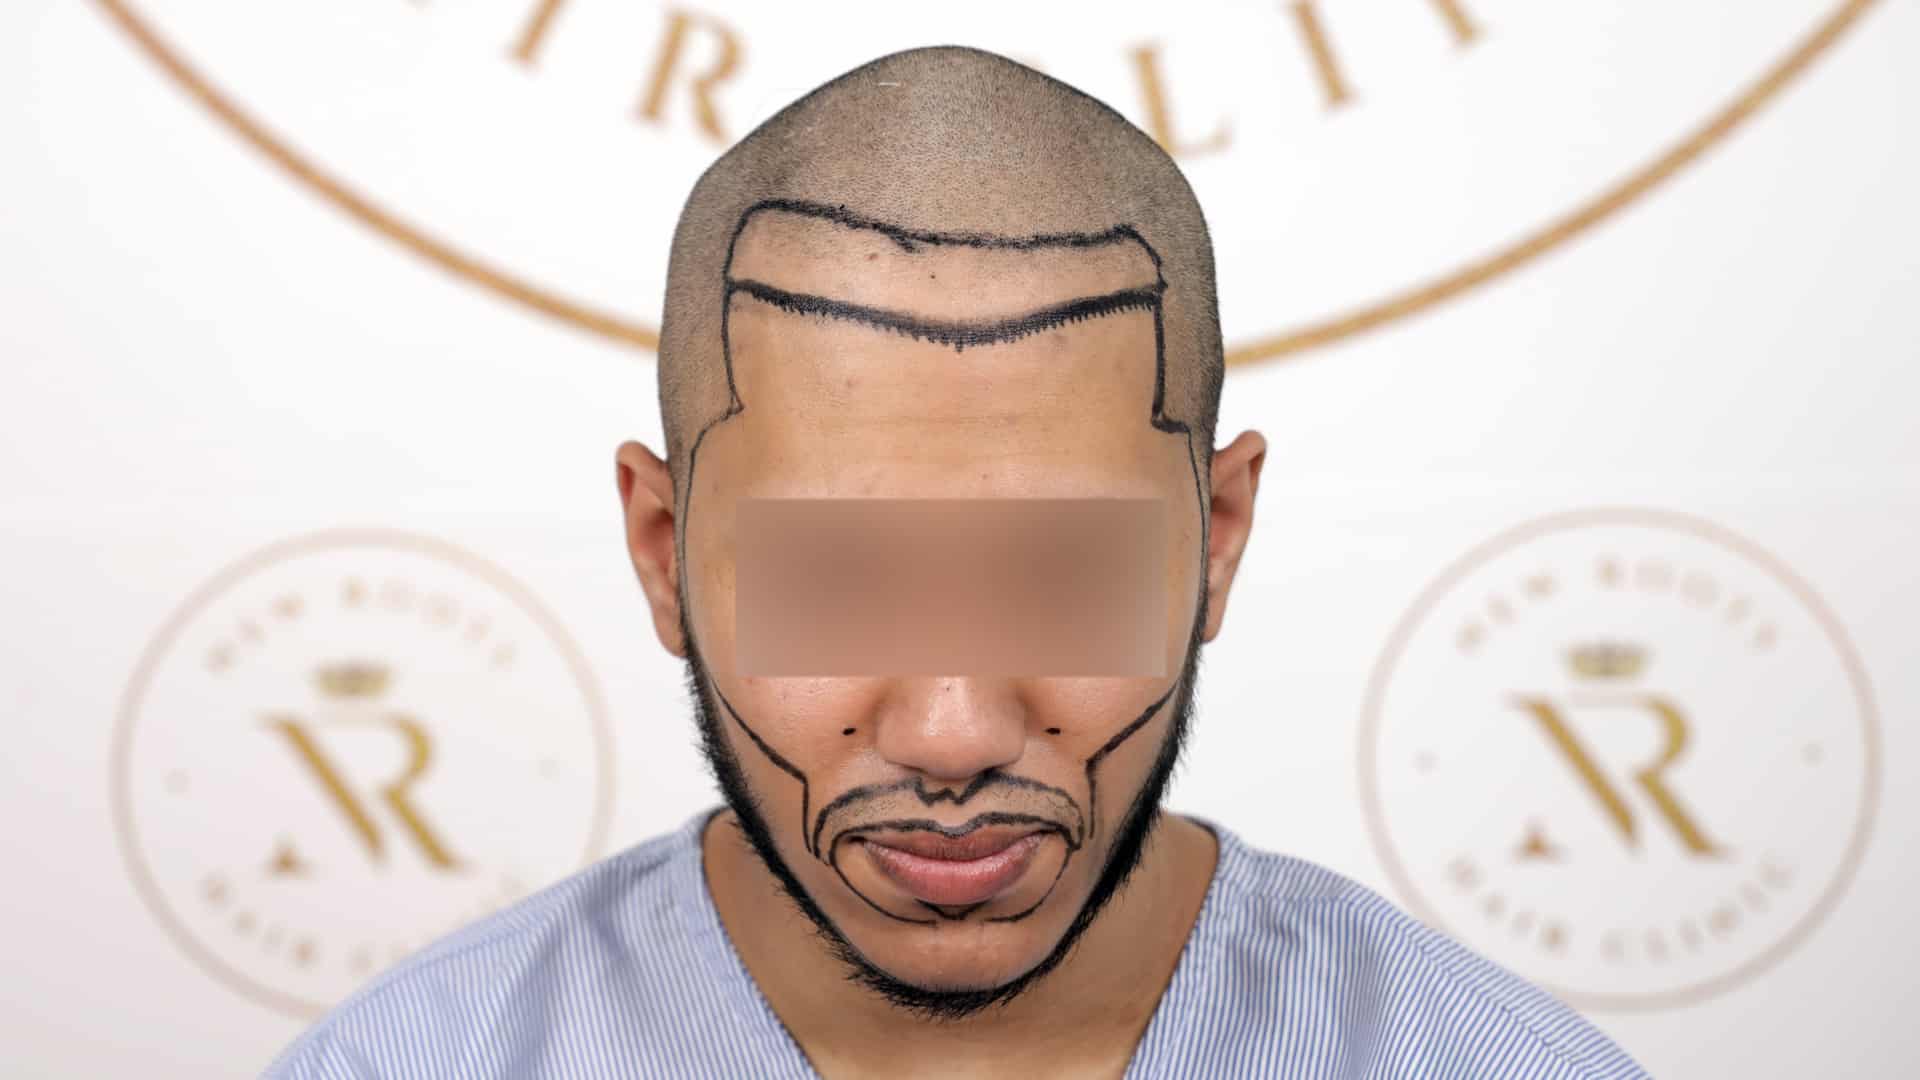 Beard Hair Transplant Before After Images